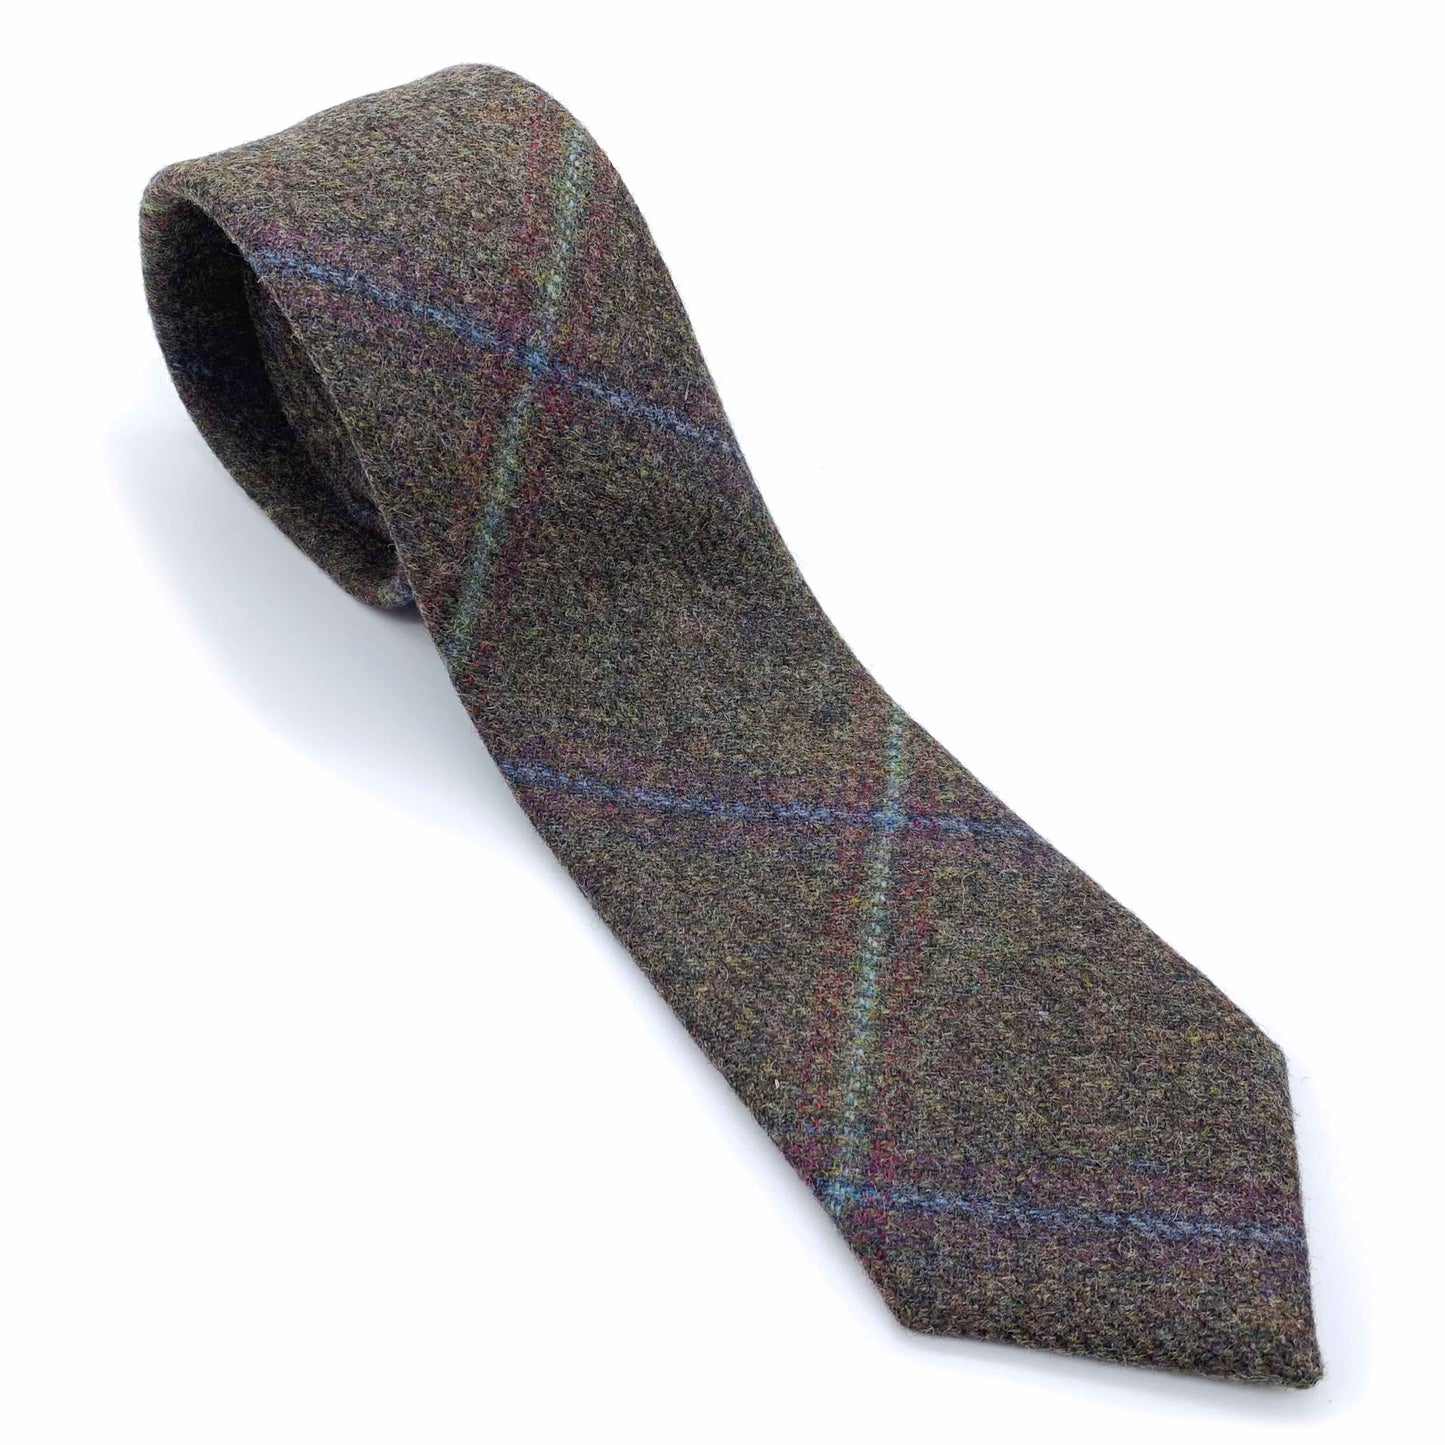 Yorkshire City Traditional Wool Tie - The Great Yorkshire Shop